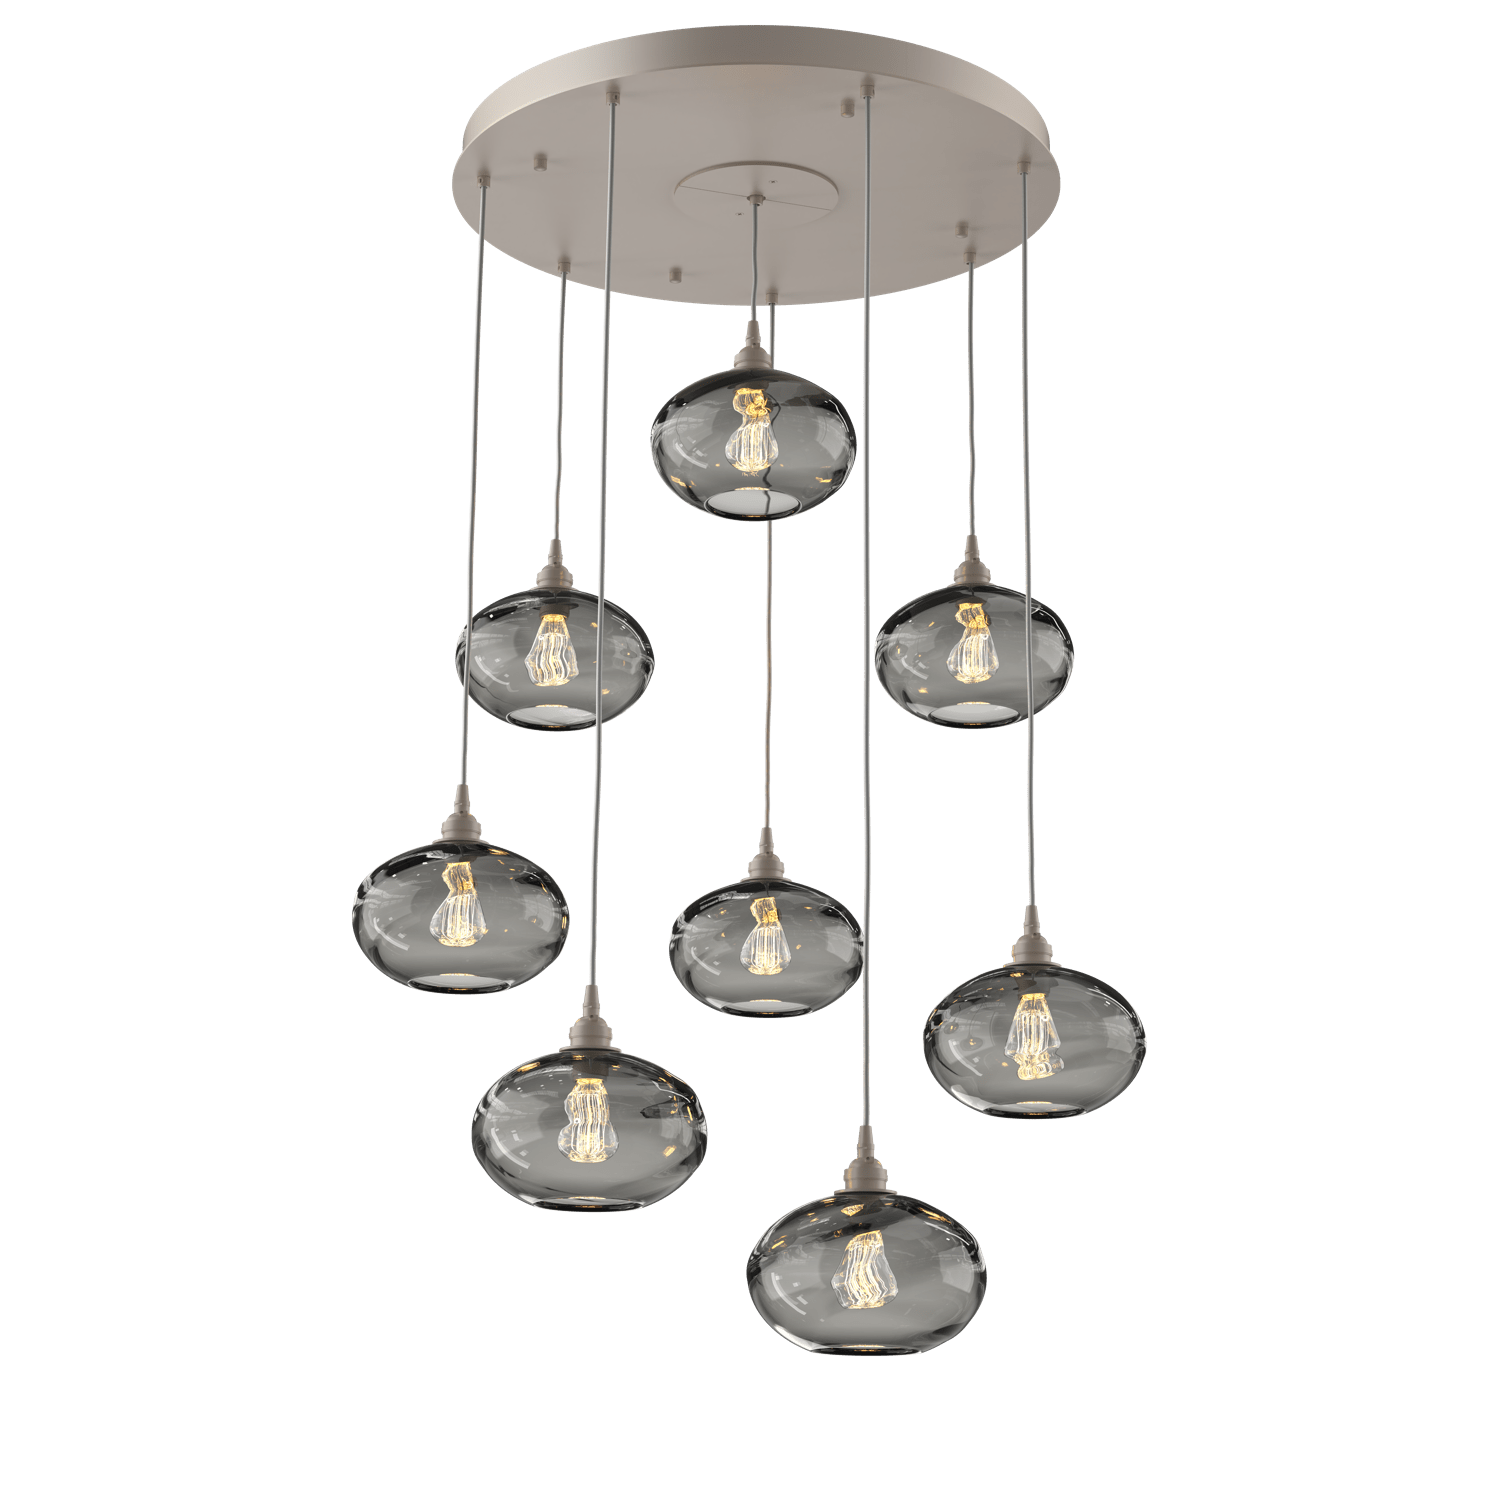 CHB0036-08-BS-OS-Hammerton-Studio-Optic-Blown-Glass-Coppa-8-light-round-pendant-chandelier-with-metallic-beige-silver-finish-and-optic-smoke-blown-glass-shades-and-incandescent-lamping